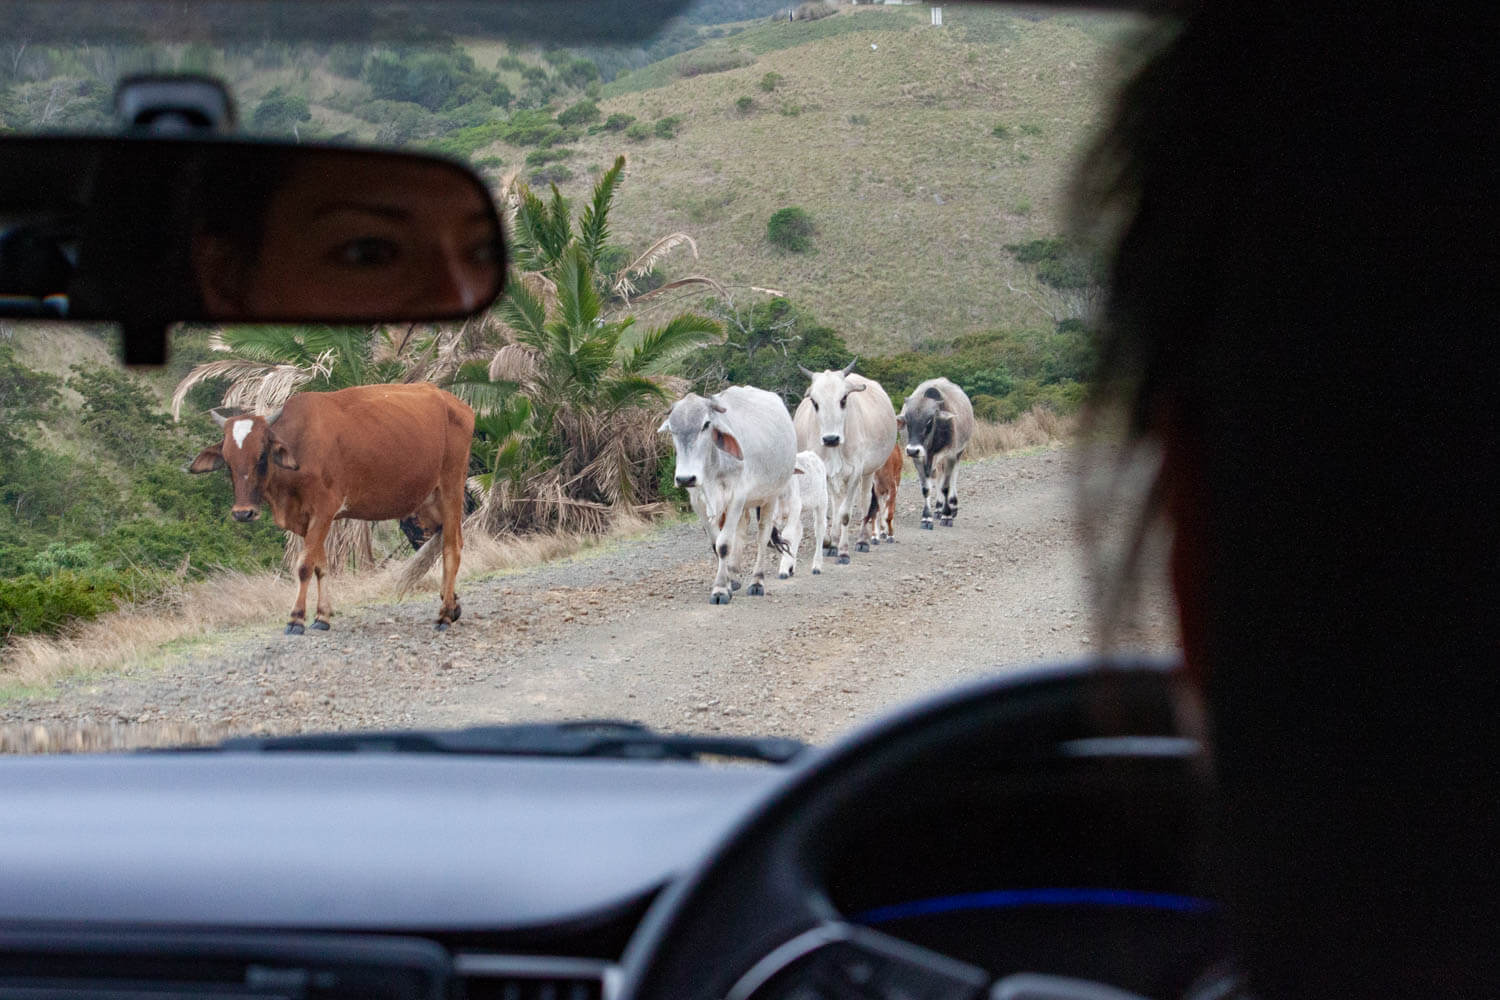 Kim driving with cows in the way